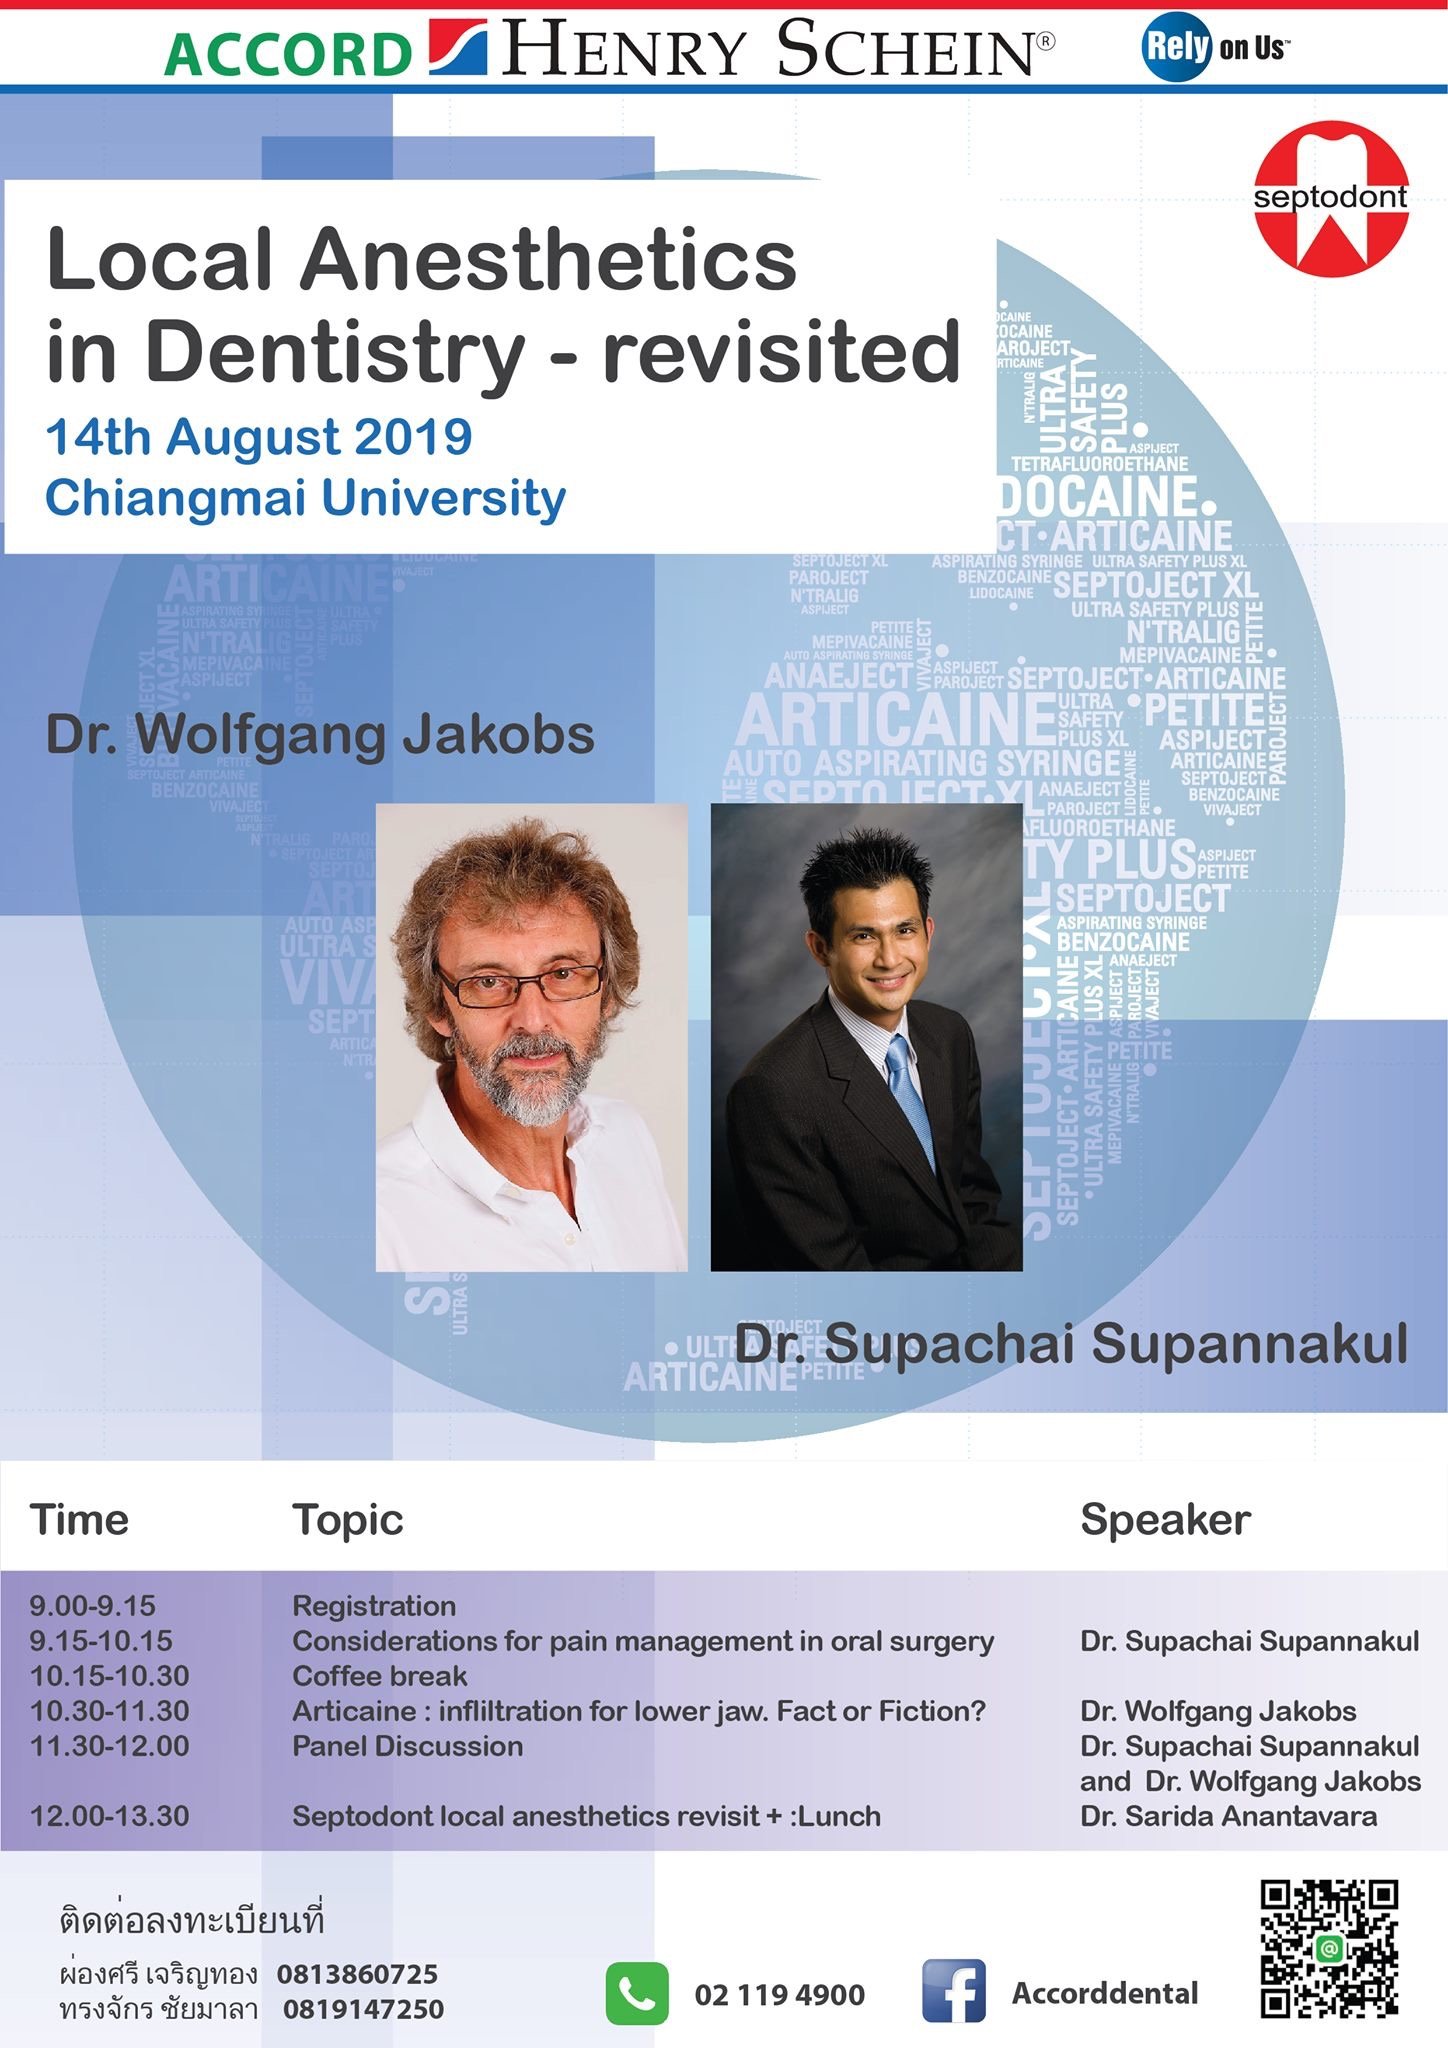 Local Anesthetics in Dentistry - revisited